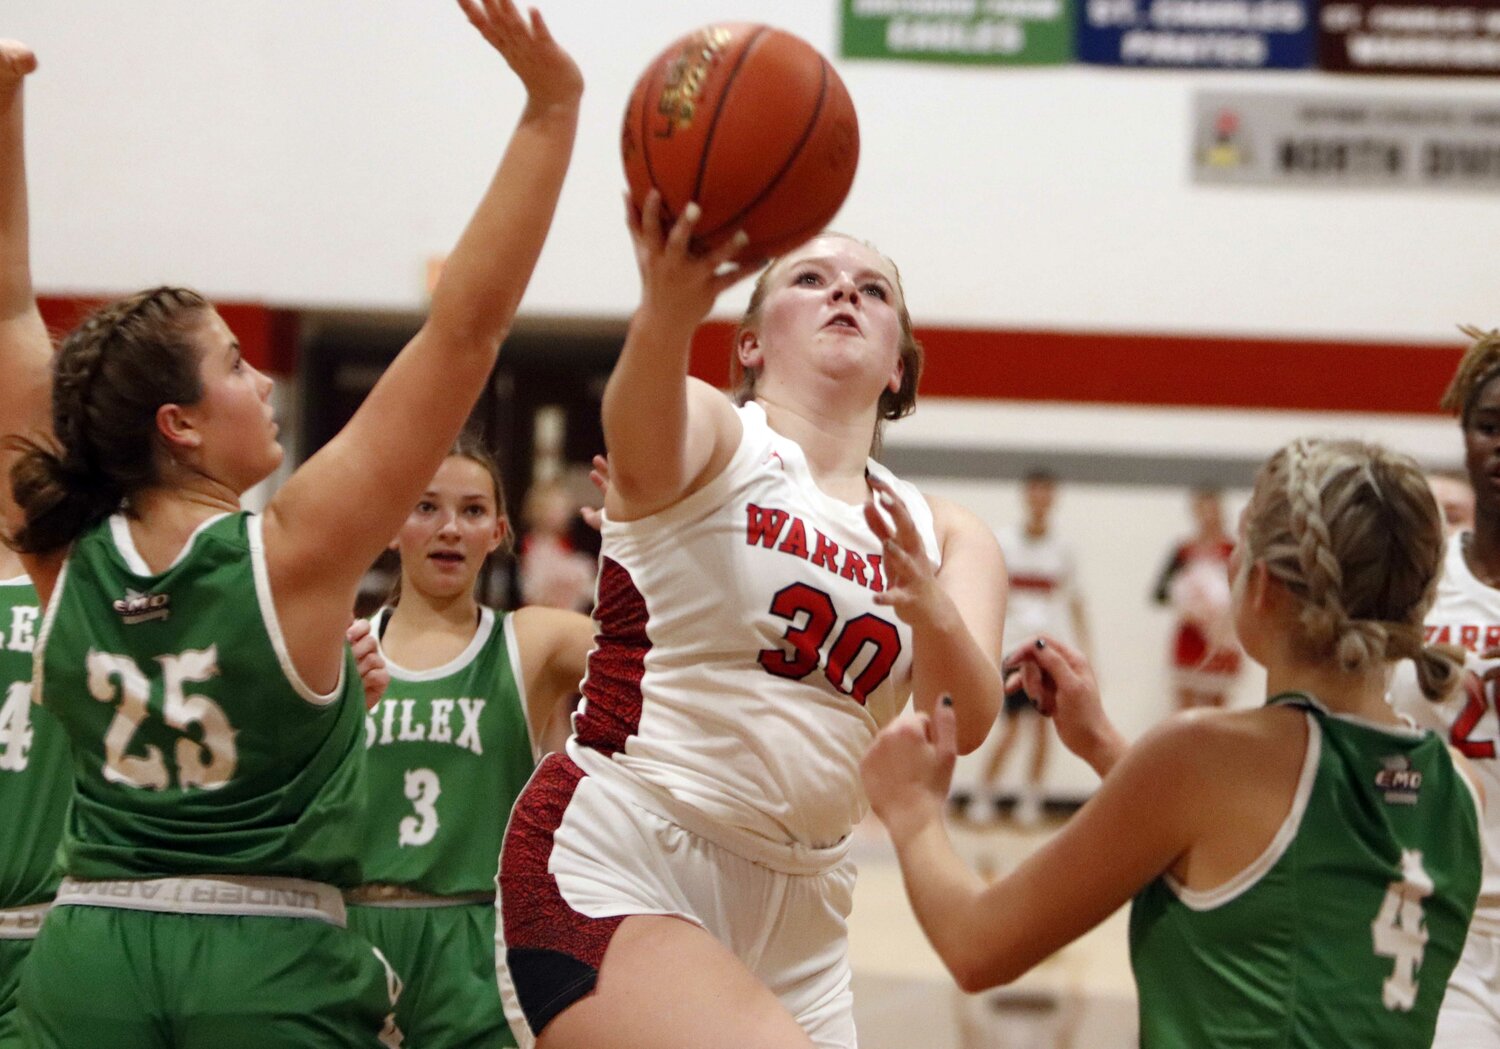 Sophi Mueller shoots a layup during Warrenton’s win over Silex on Tuesday.